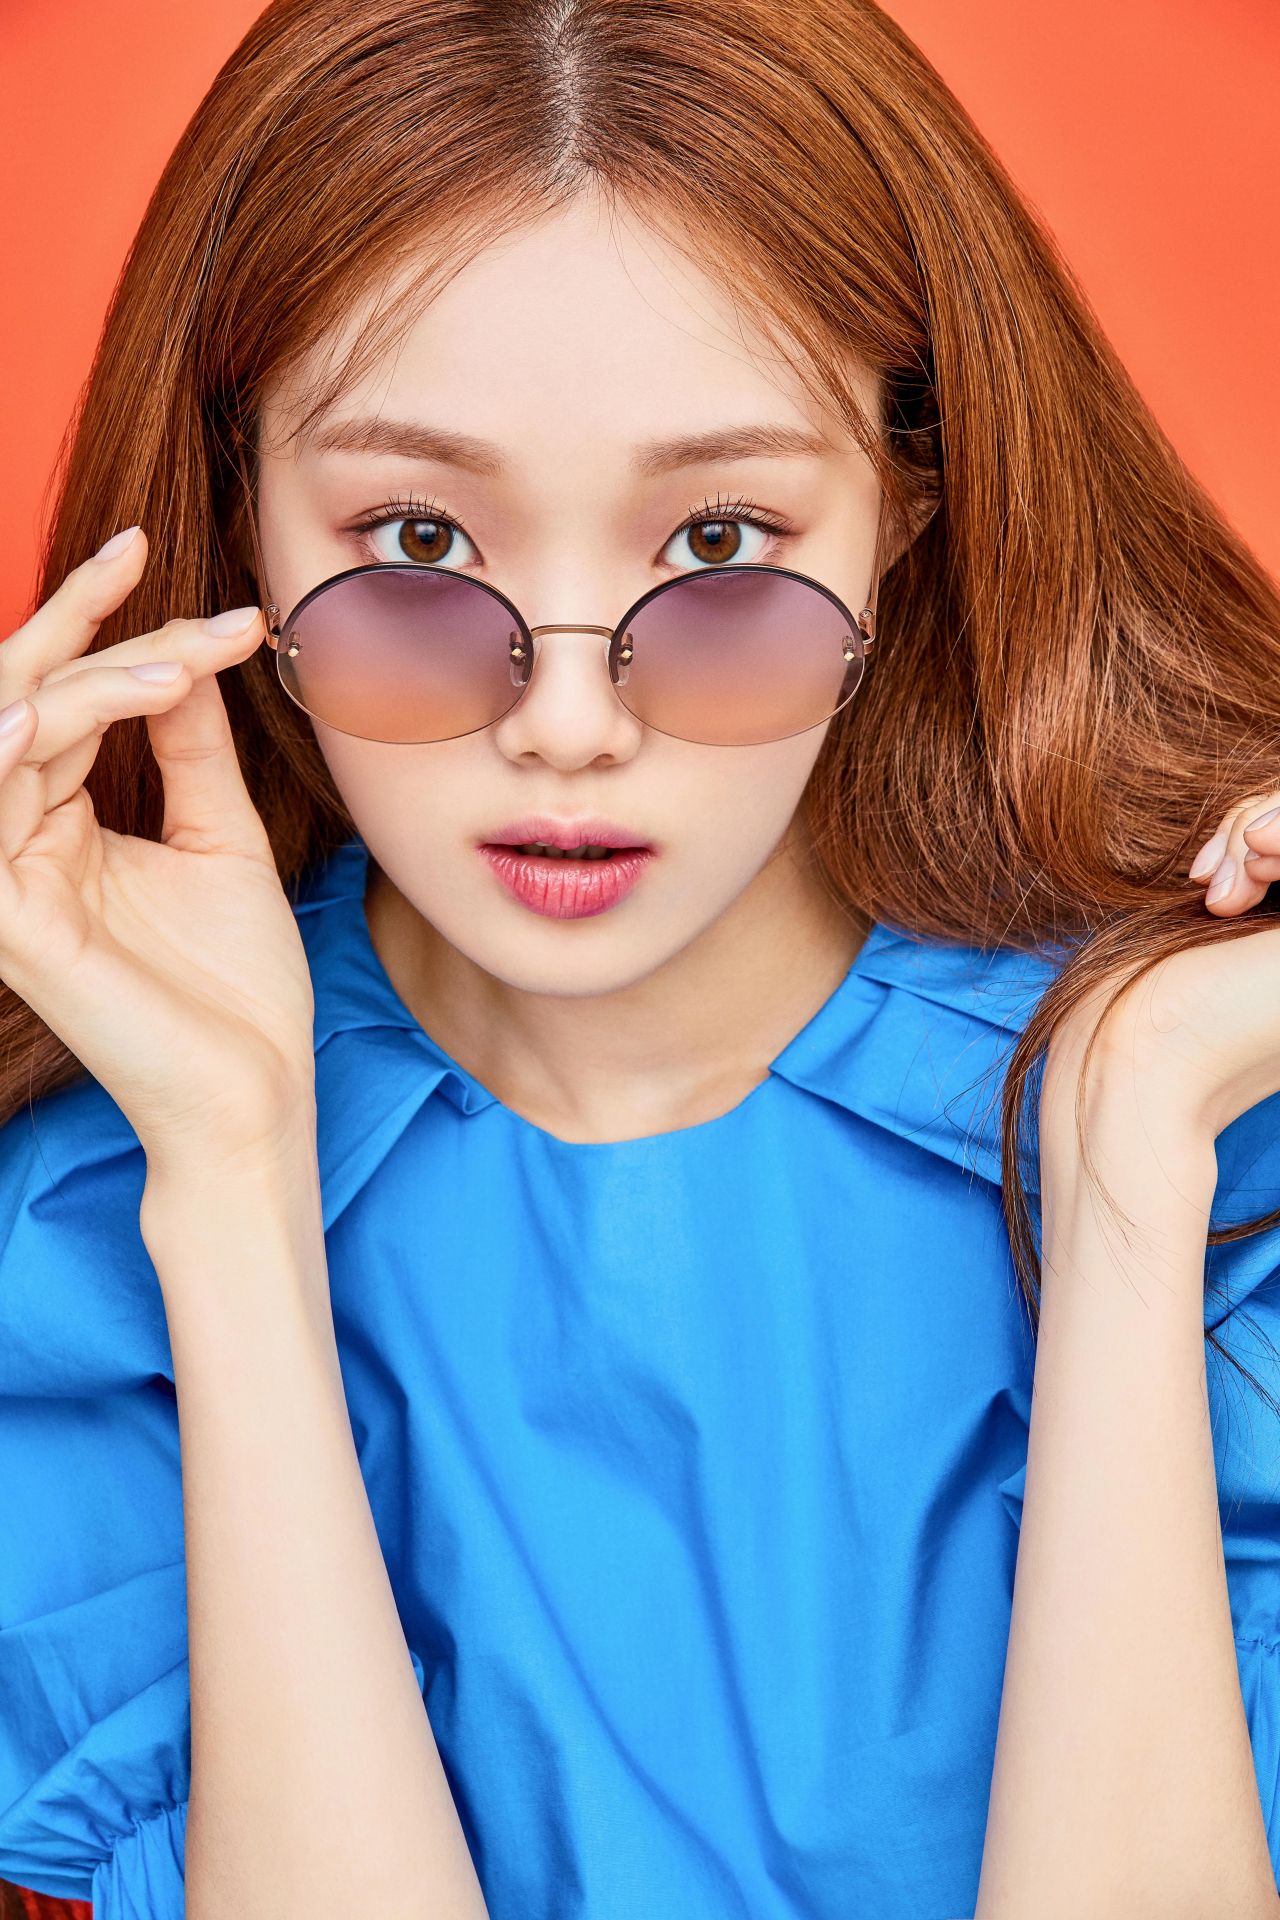 Lee Sung Kyung Photoshoot | Hot Sex Picture